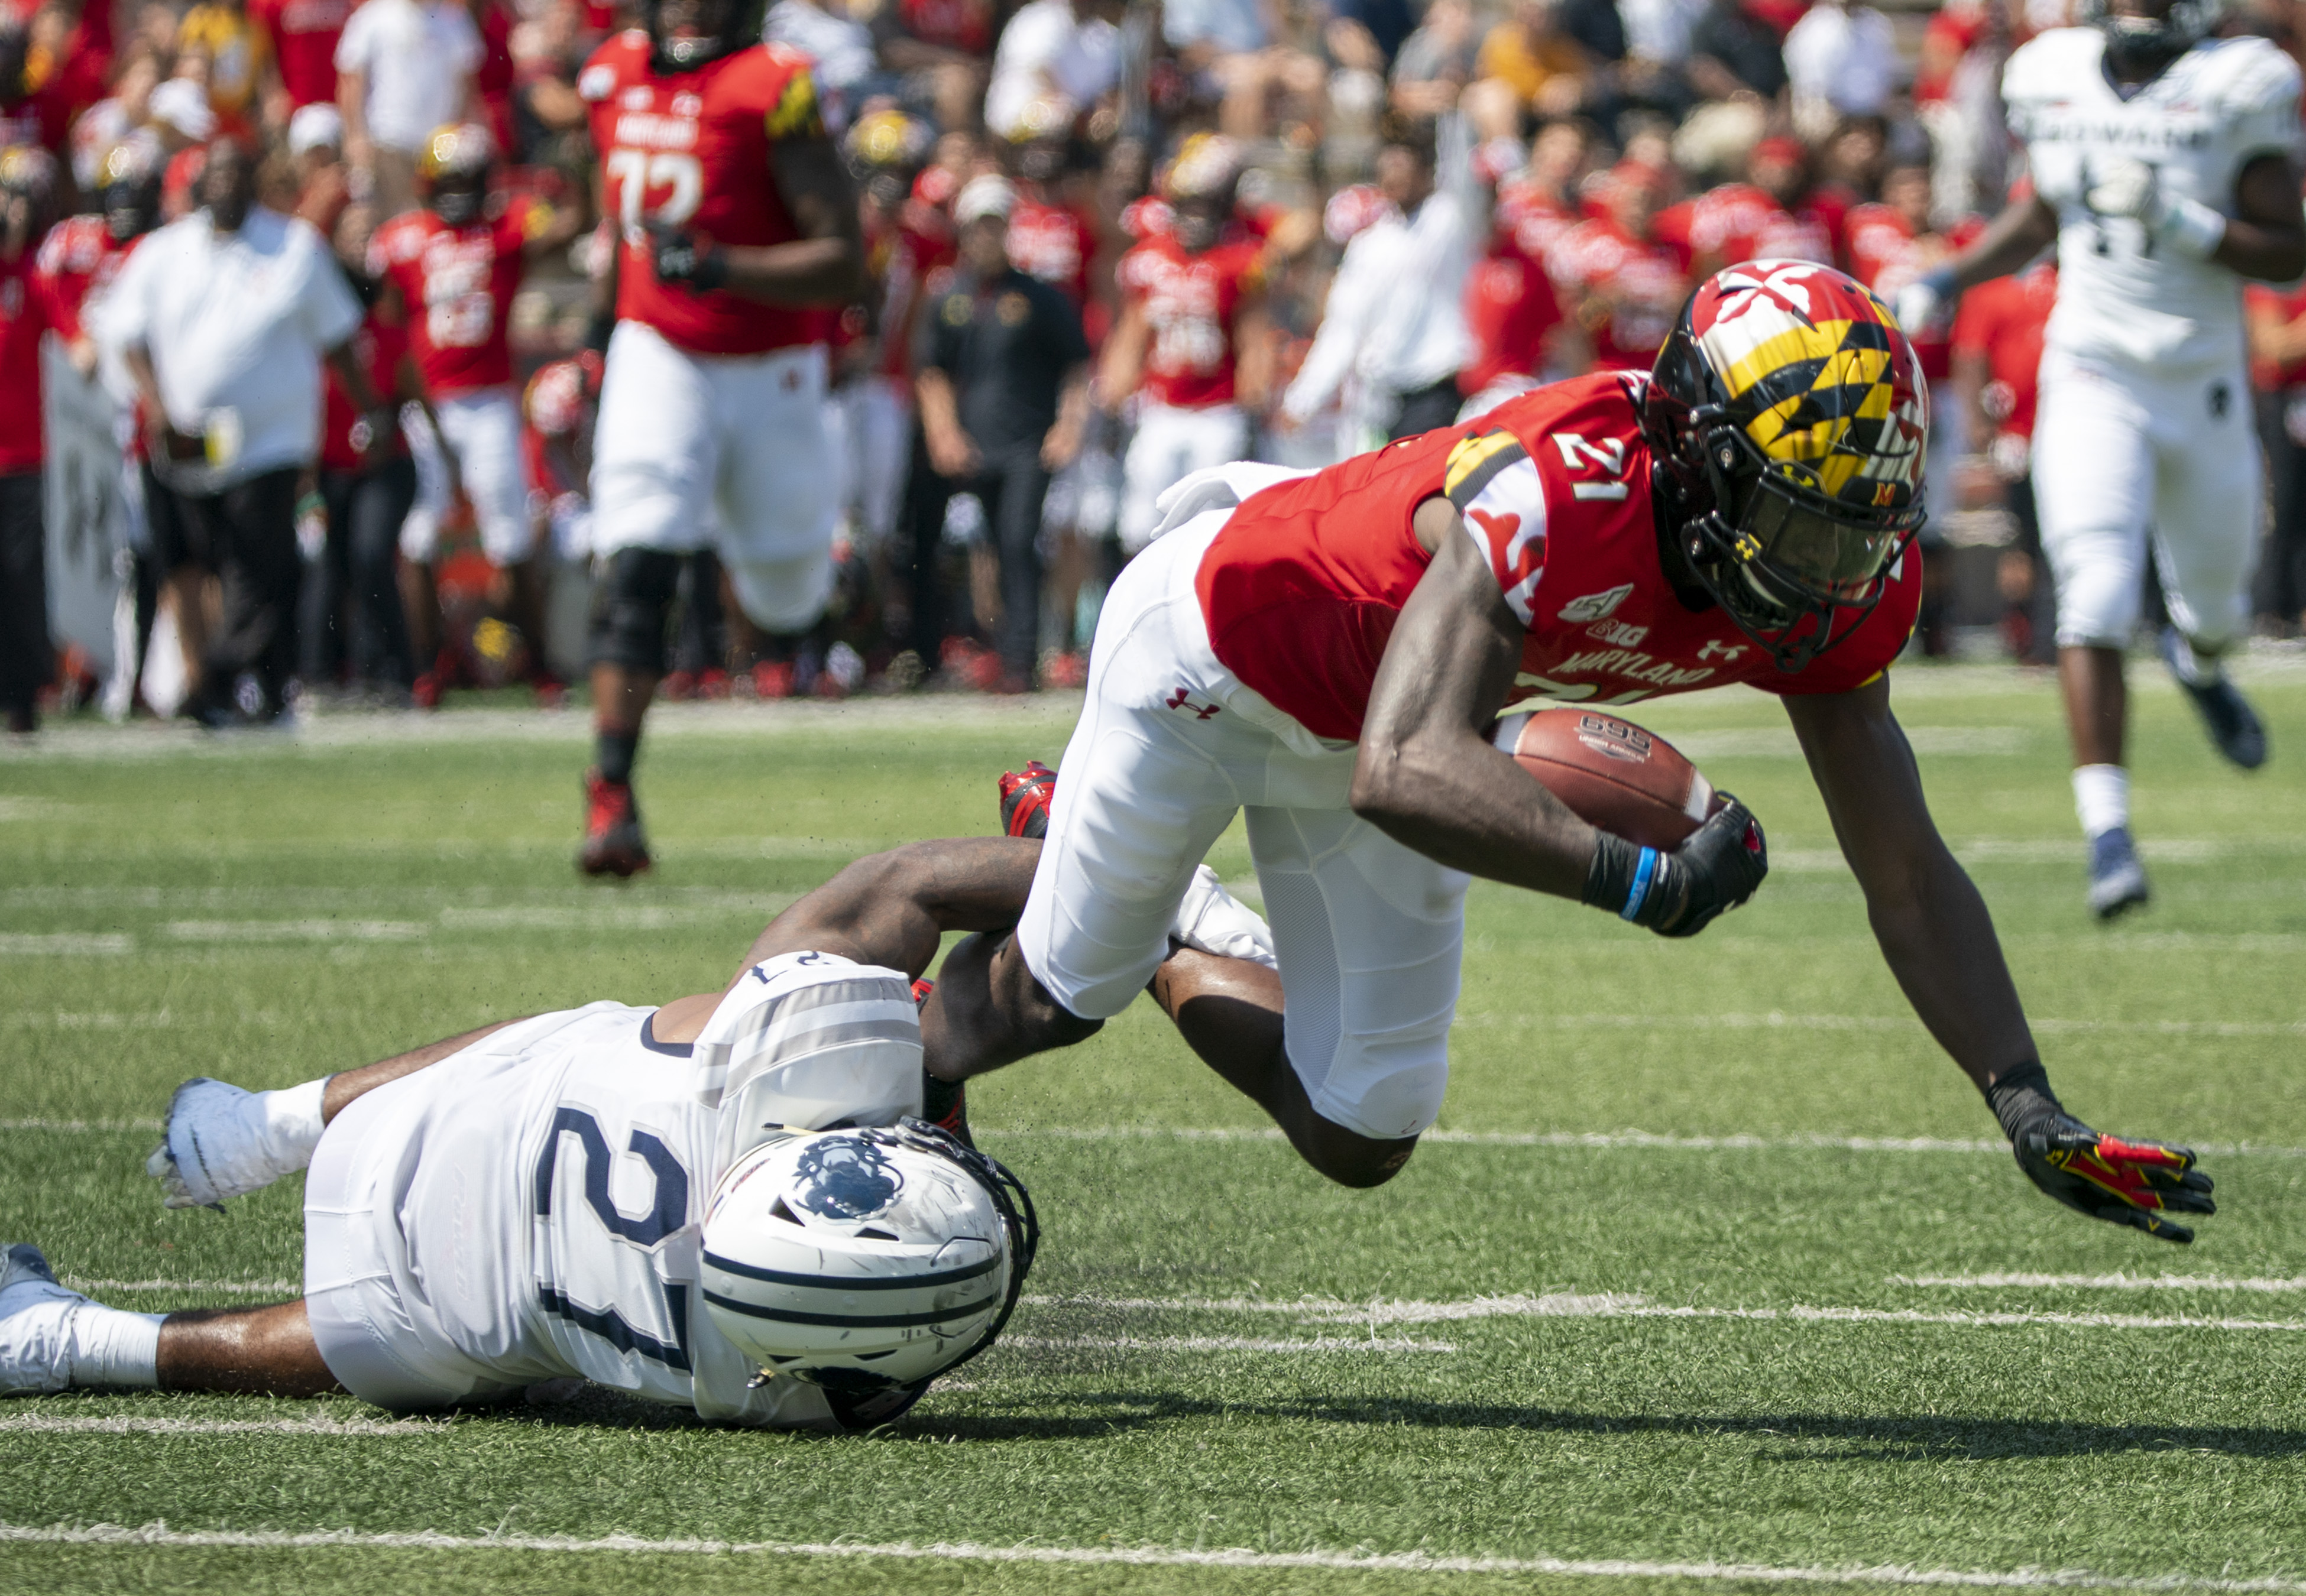 COLLEGE FOOTBALL: AUG 31 Howard at Maryland